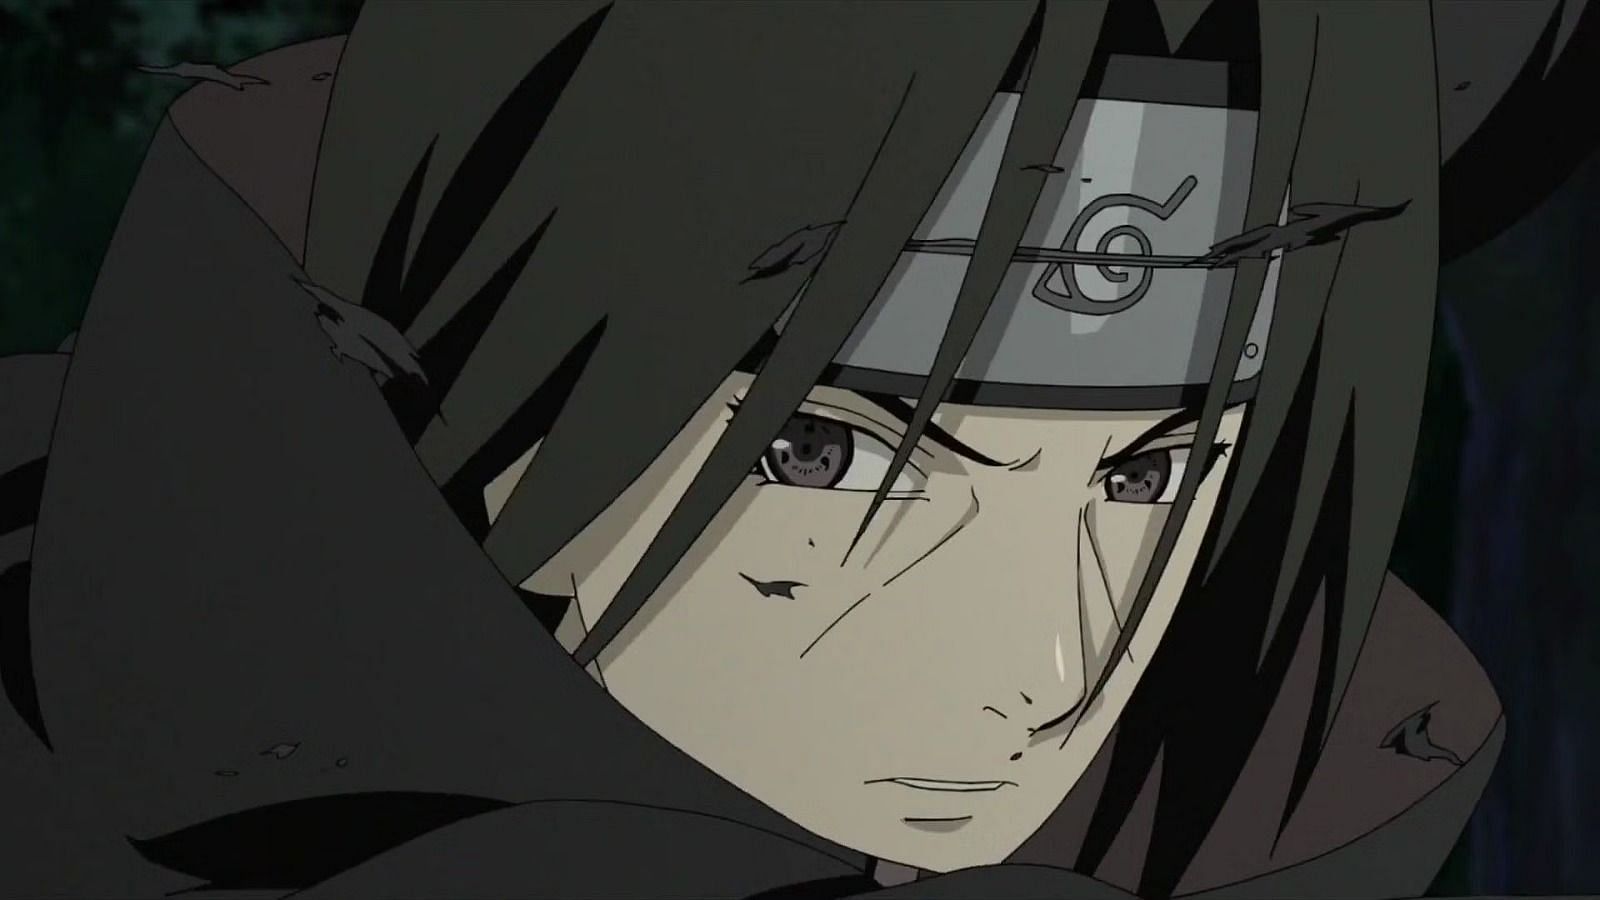 Itachi is an anime side character who is more famous than the main characters. (image via Studio Pierrot)